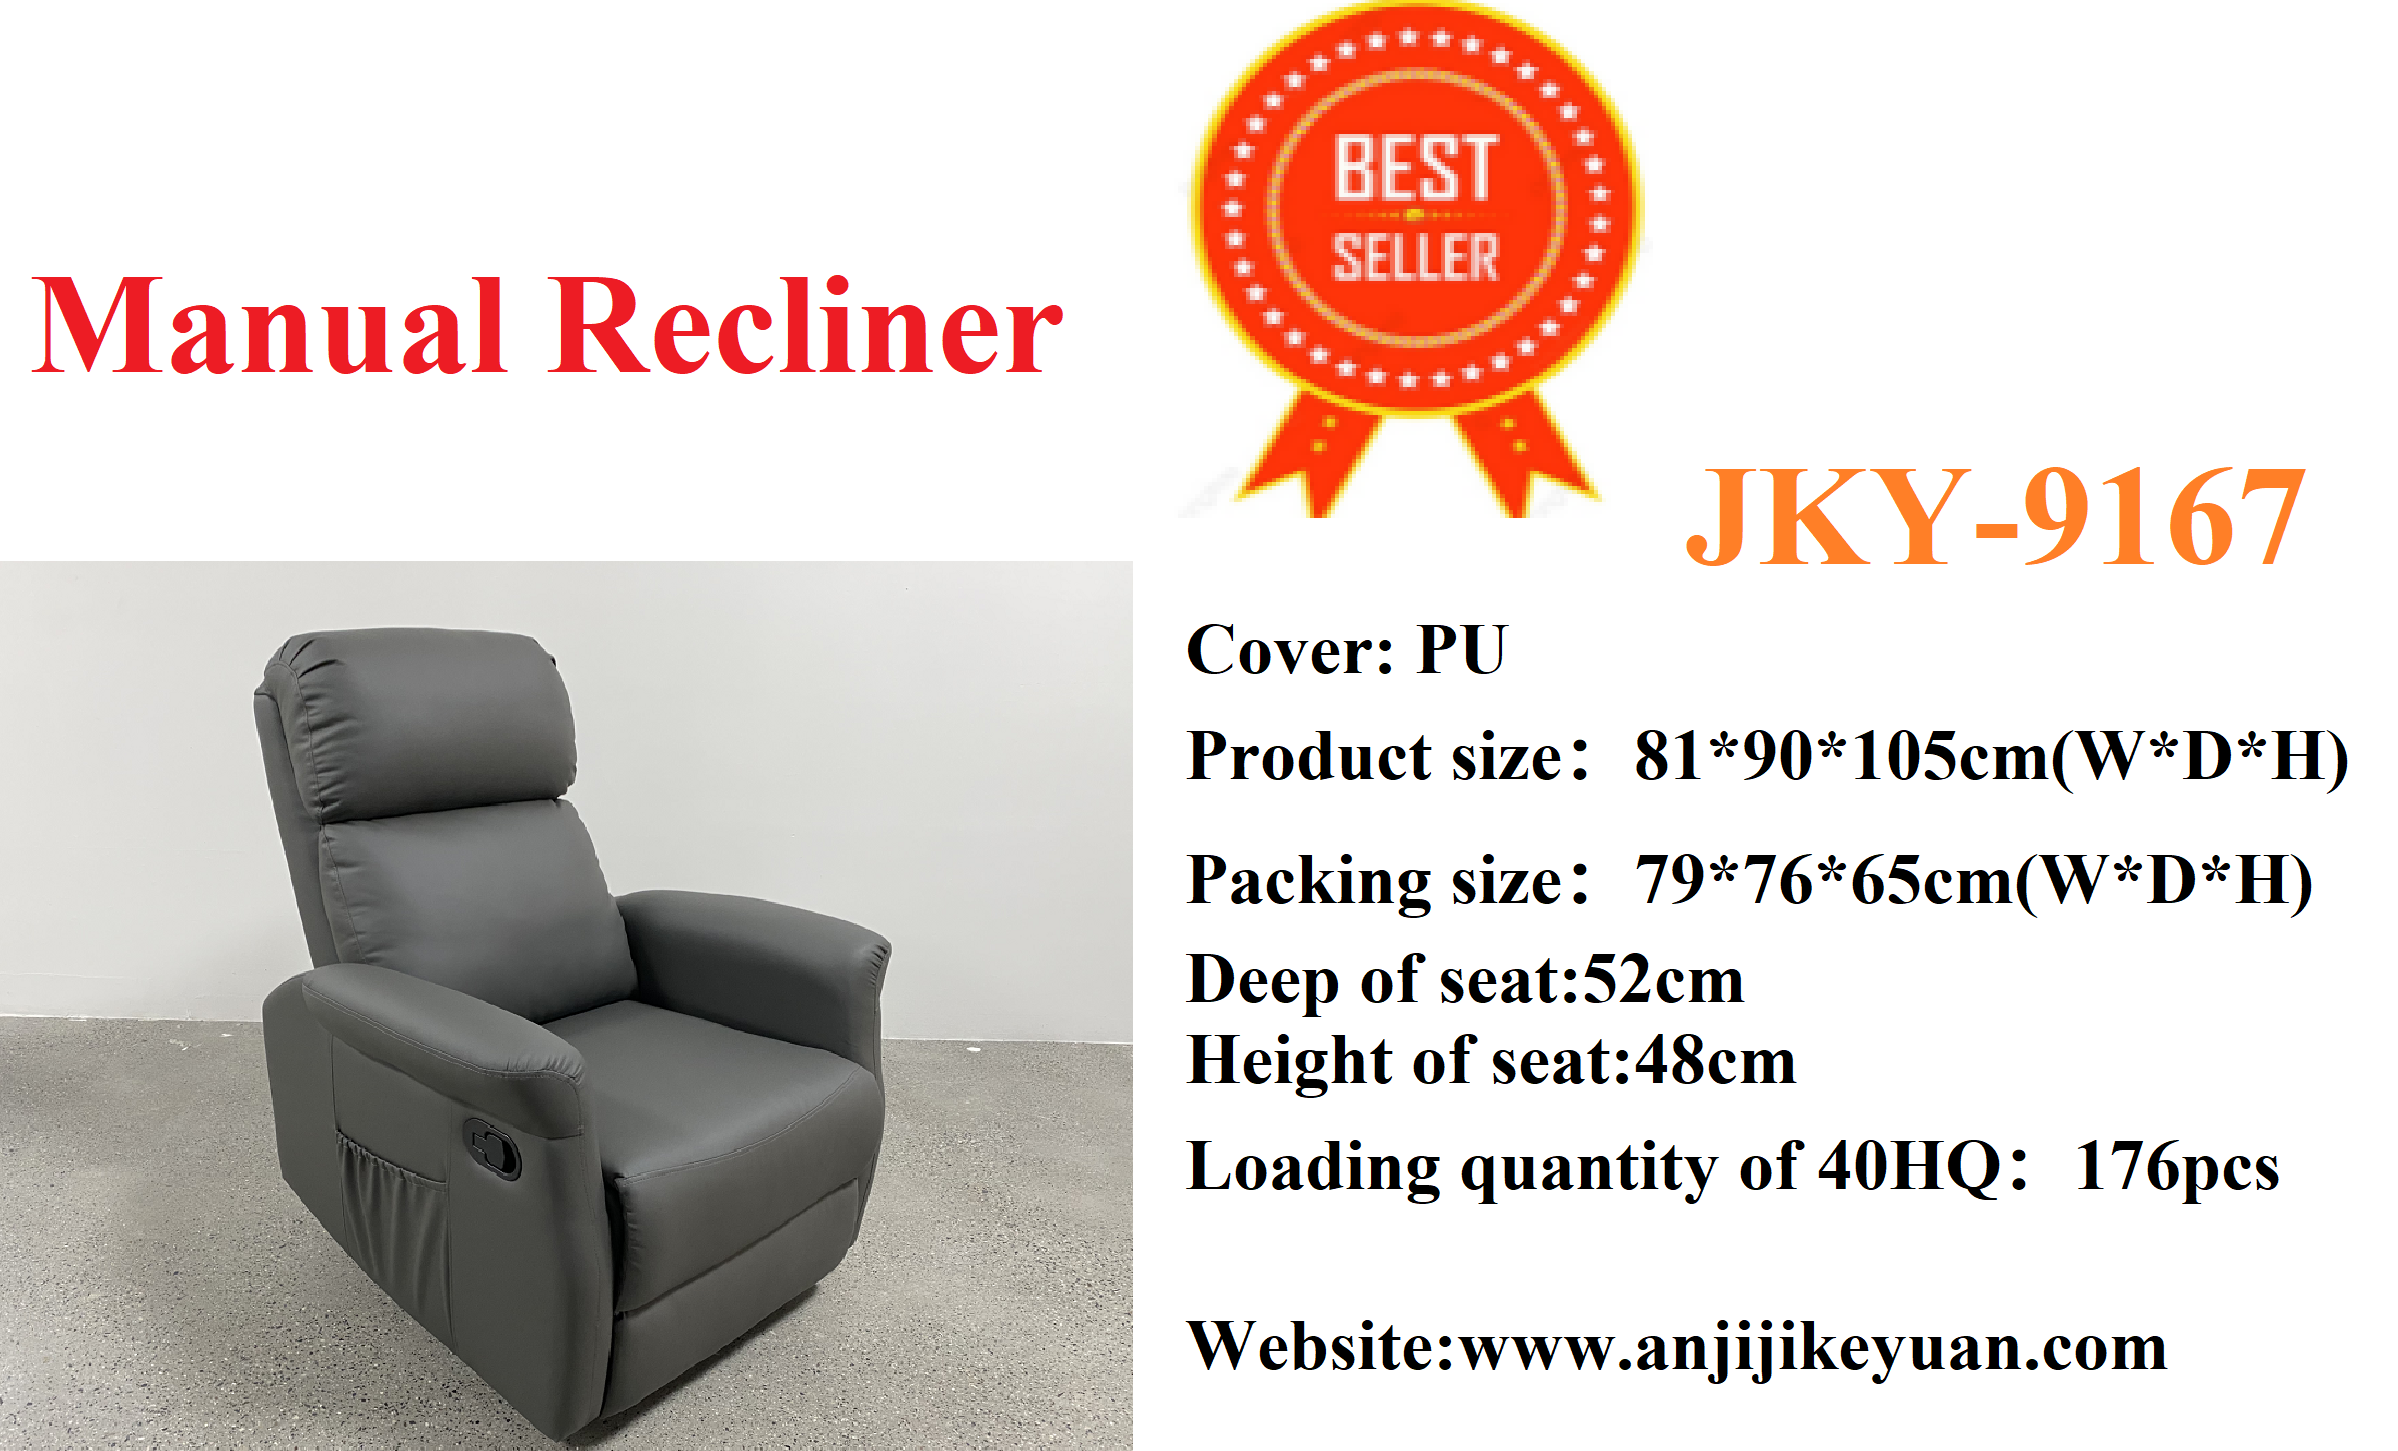 Hot Sale of Manual Recliner for Christmas!